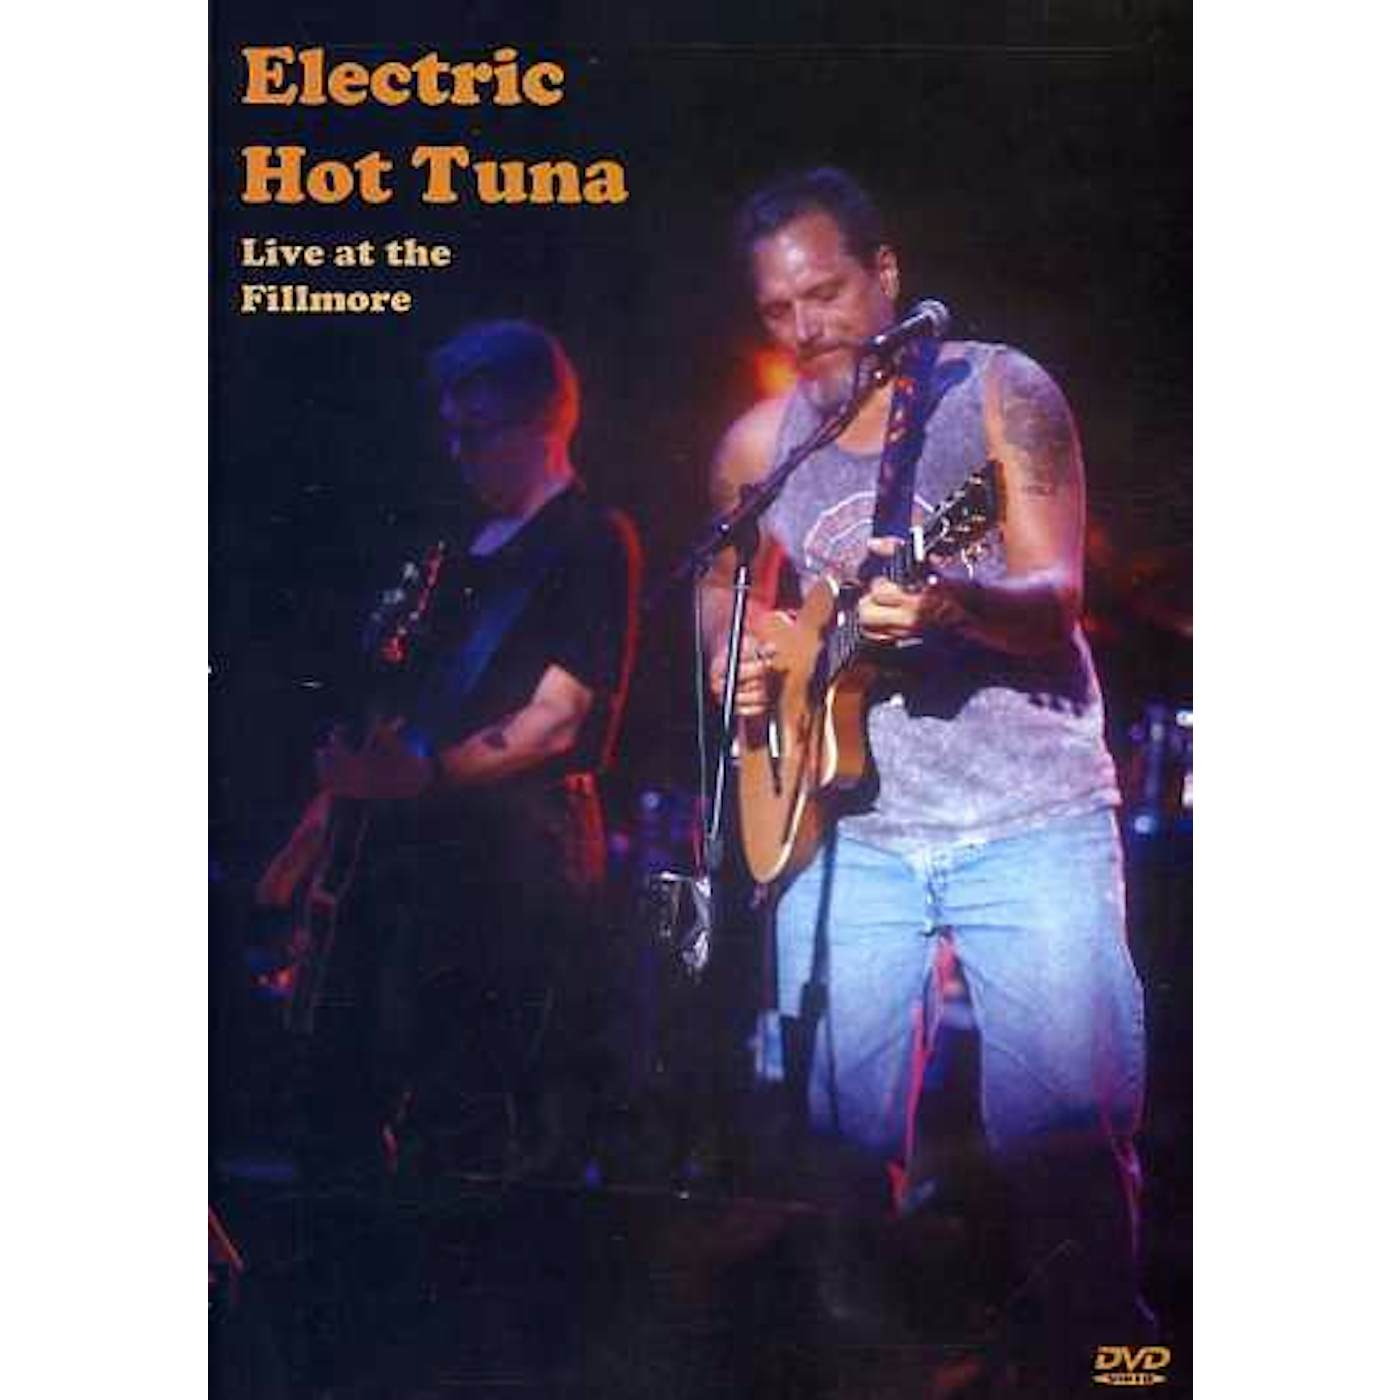 ELECTRIC HOT TUNA LIVE AT THE FILLMORE DVD